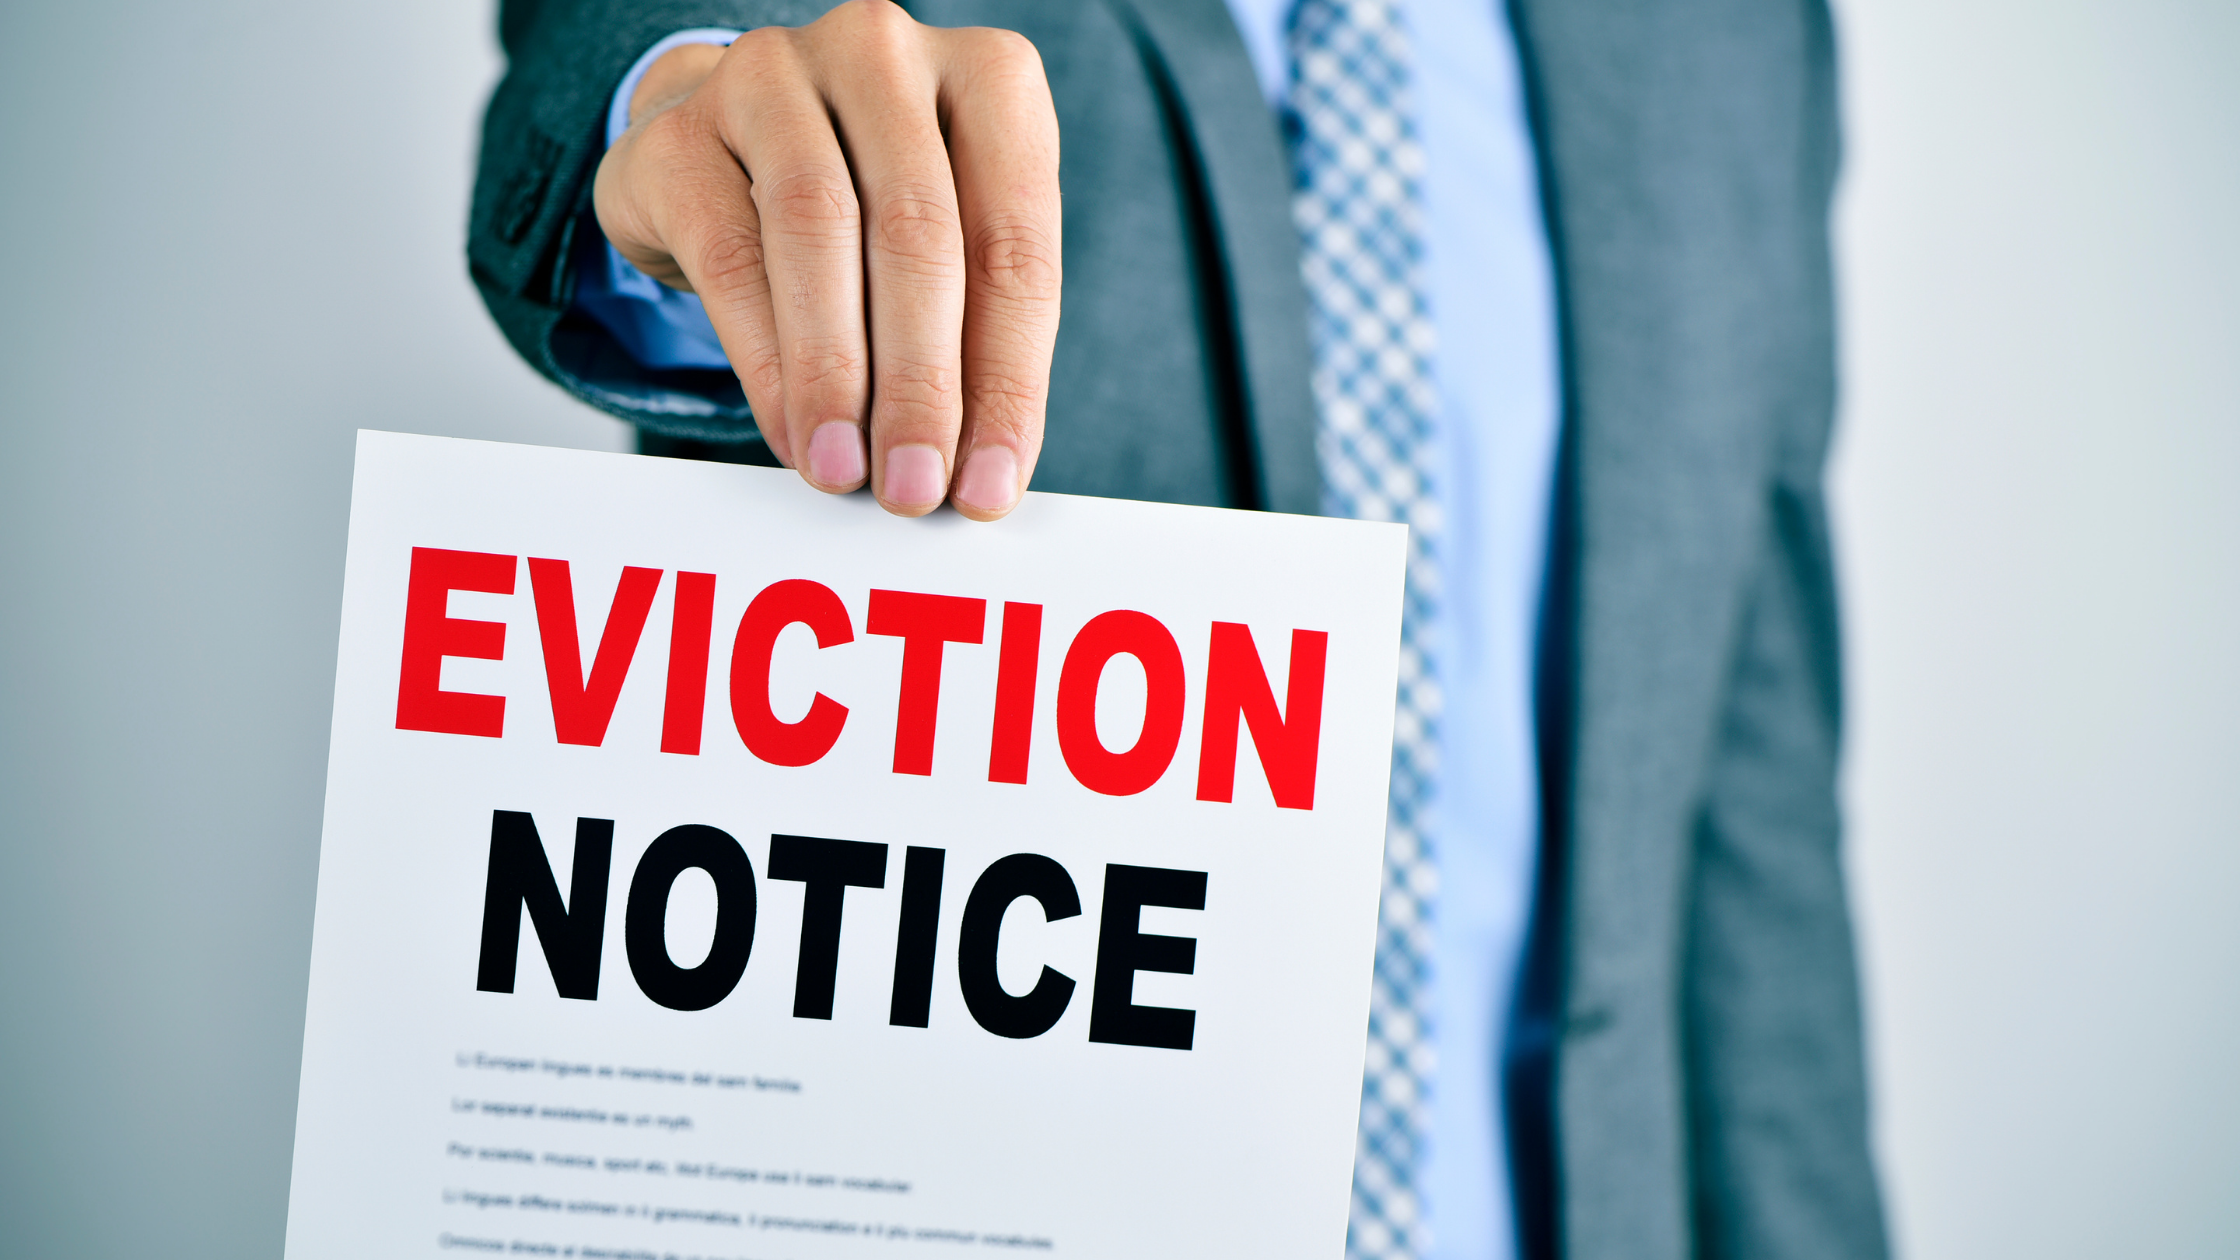 Eviction Mediation Advice: Solve Cases Without Court Hearings